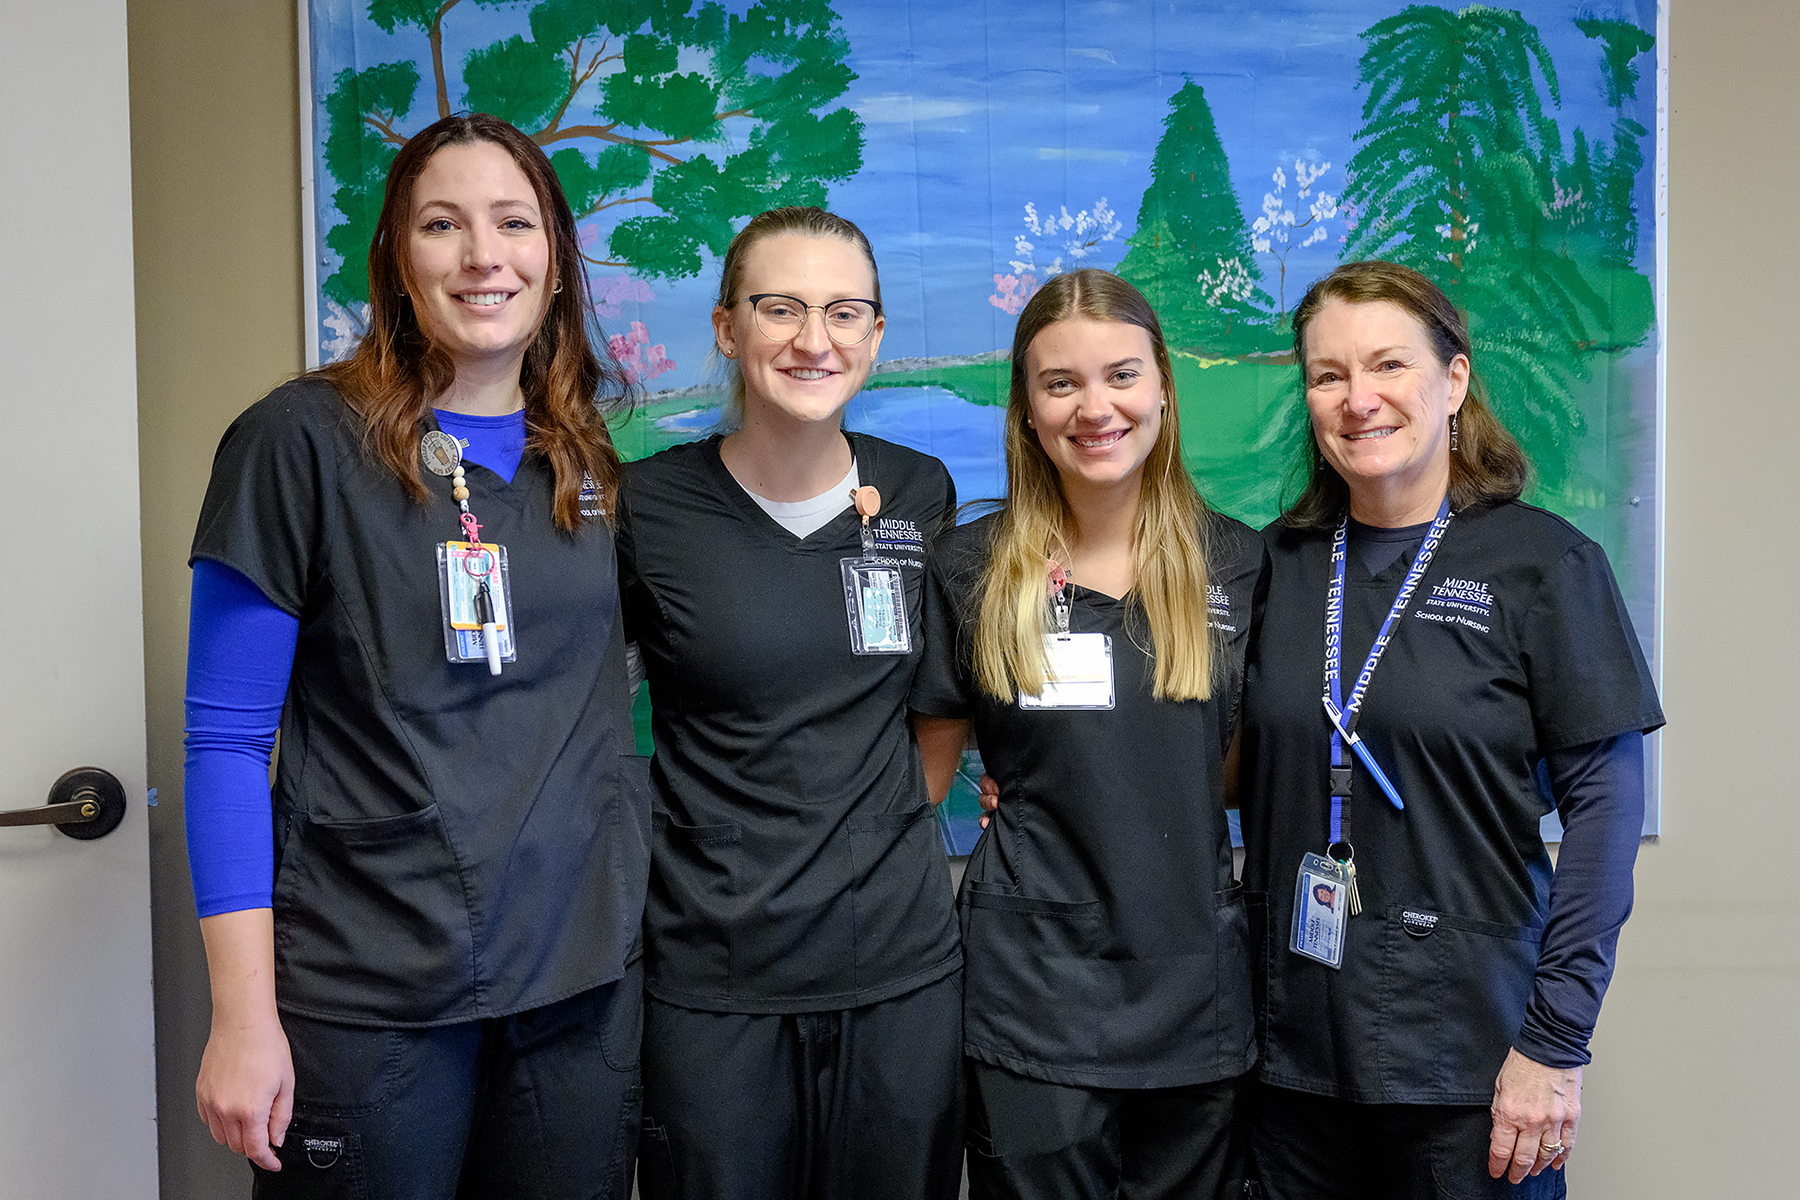 Middle Tennessee State University nursing students, from left, Kaitlyn Beckstead, Barbara Frizzell and Insa Feldhusen pose for a photo with their nursing professor, Shelley Moore, far right, while completing the final hours of their hands-on experience at local Mindful Care adult day program as part of a new partnership between the nonprofit and students in the School of Nursing’s Health and Gerontology course on March 13, 2023, in Murfreesboro, Tenn. (MTSU photo by J. Intintoli)